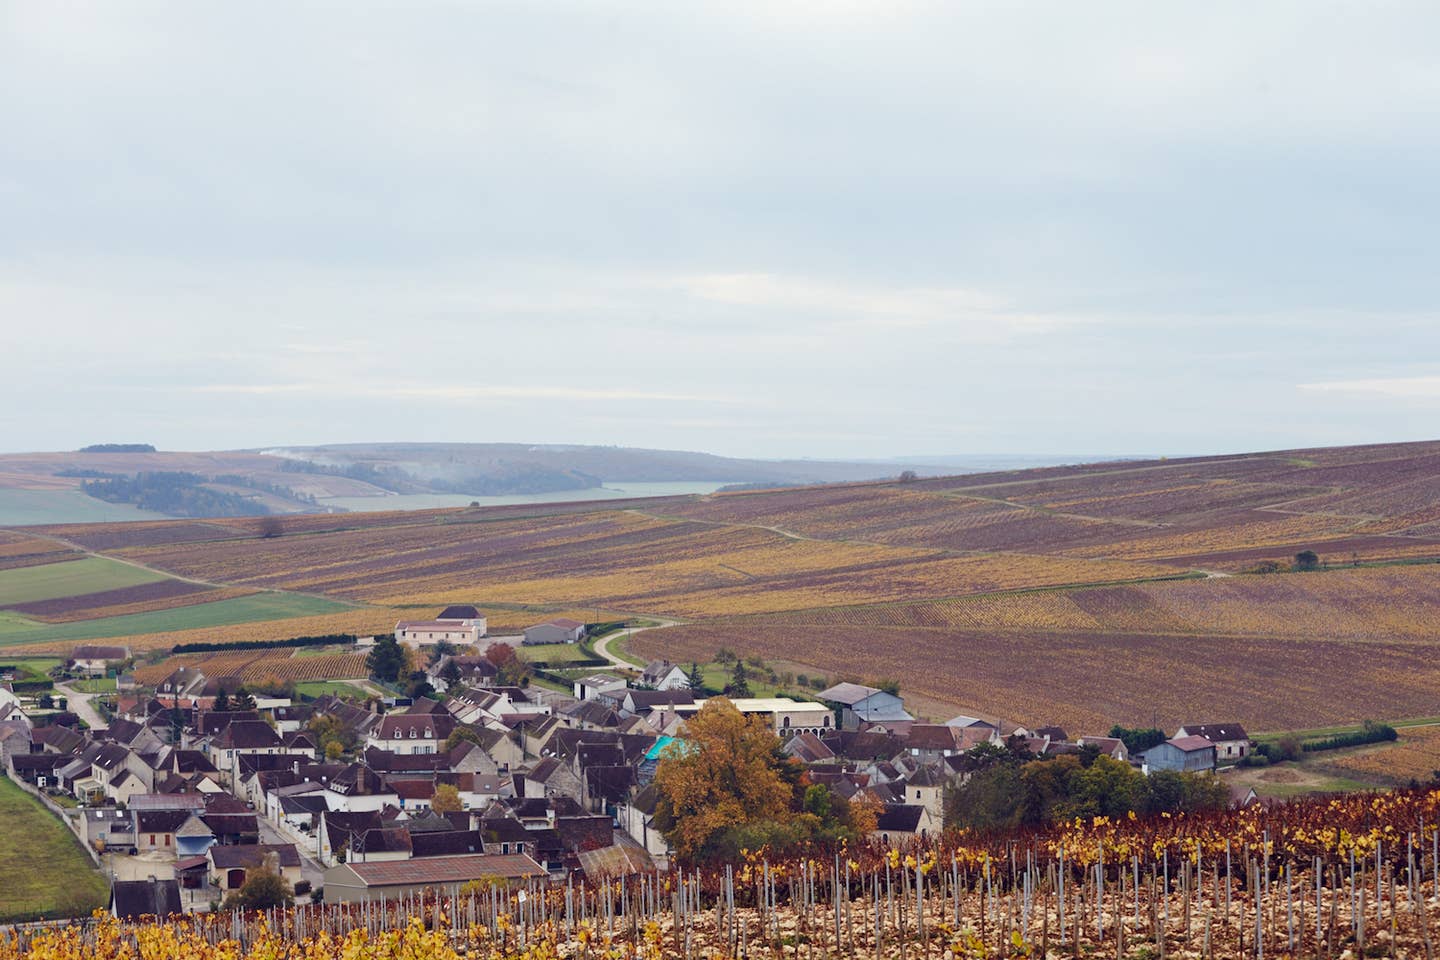 Adam Gollner on the Basics of Chablis—and How to Visit